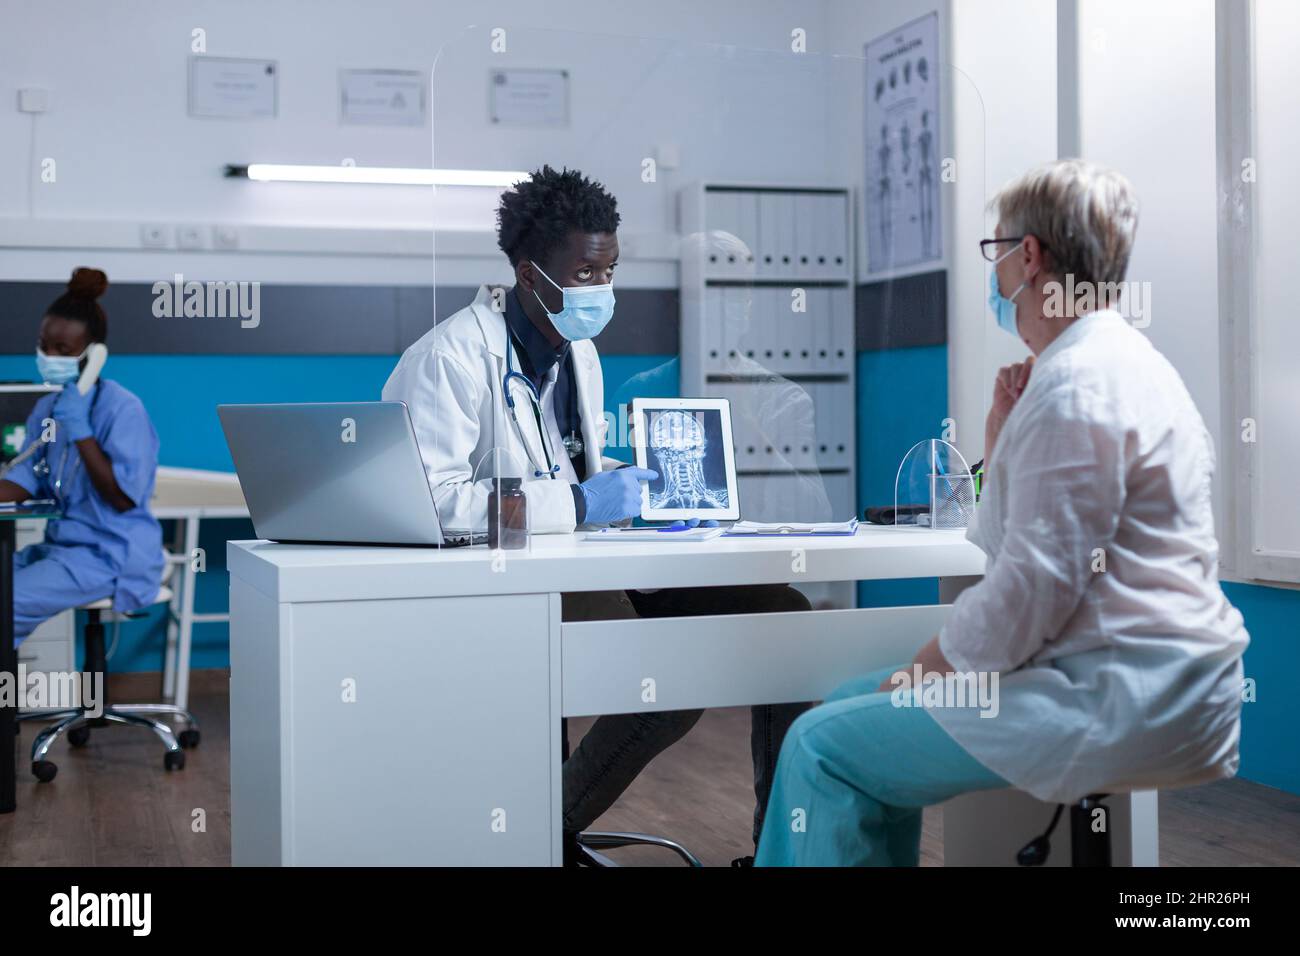 Ill retired woman being informed of bone disease while radiology expert examining MRI image scan. Clinic radiology specialised professional conversating with woman about treatment for illness curing. Stock Photo